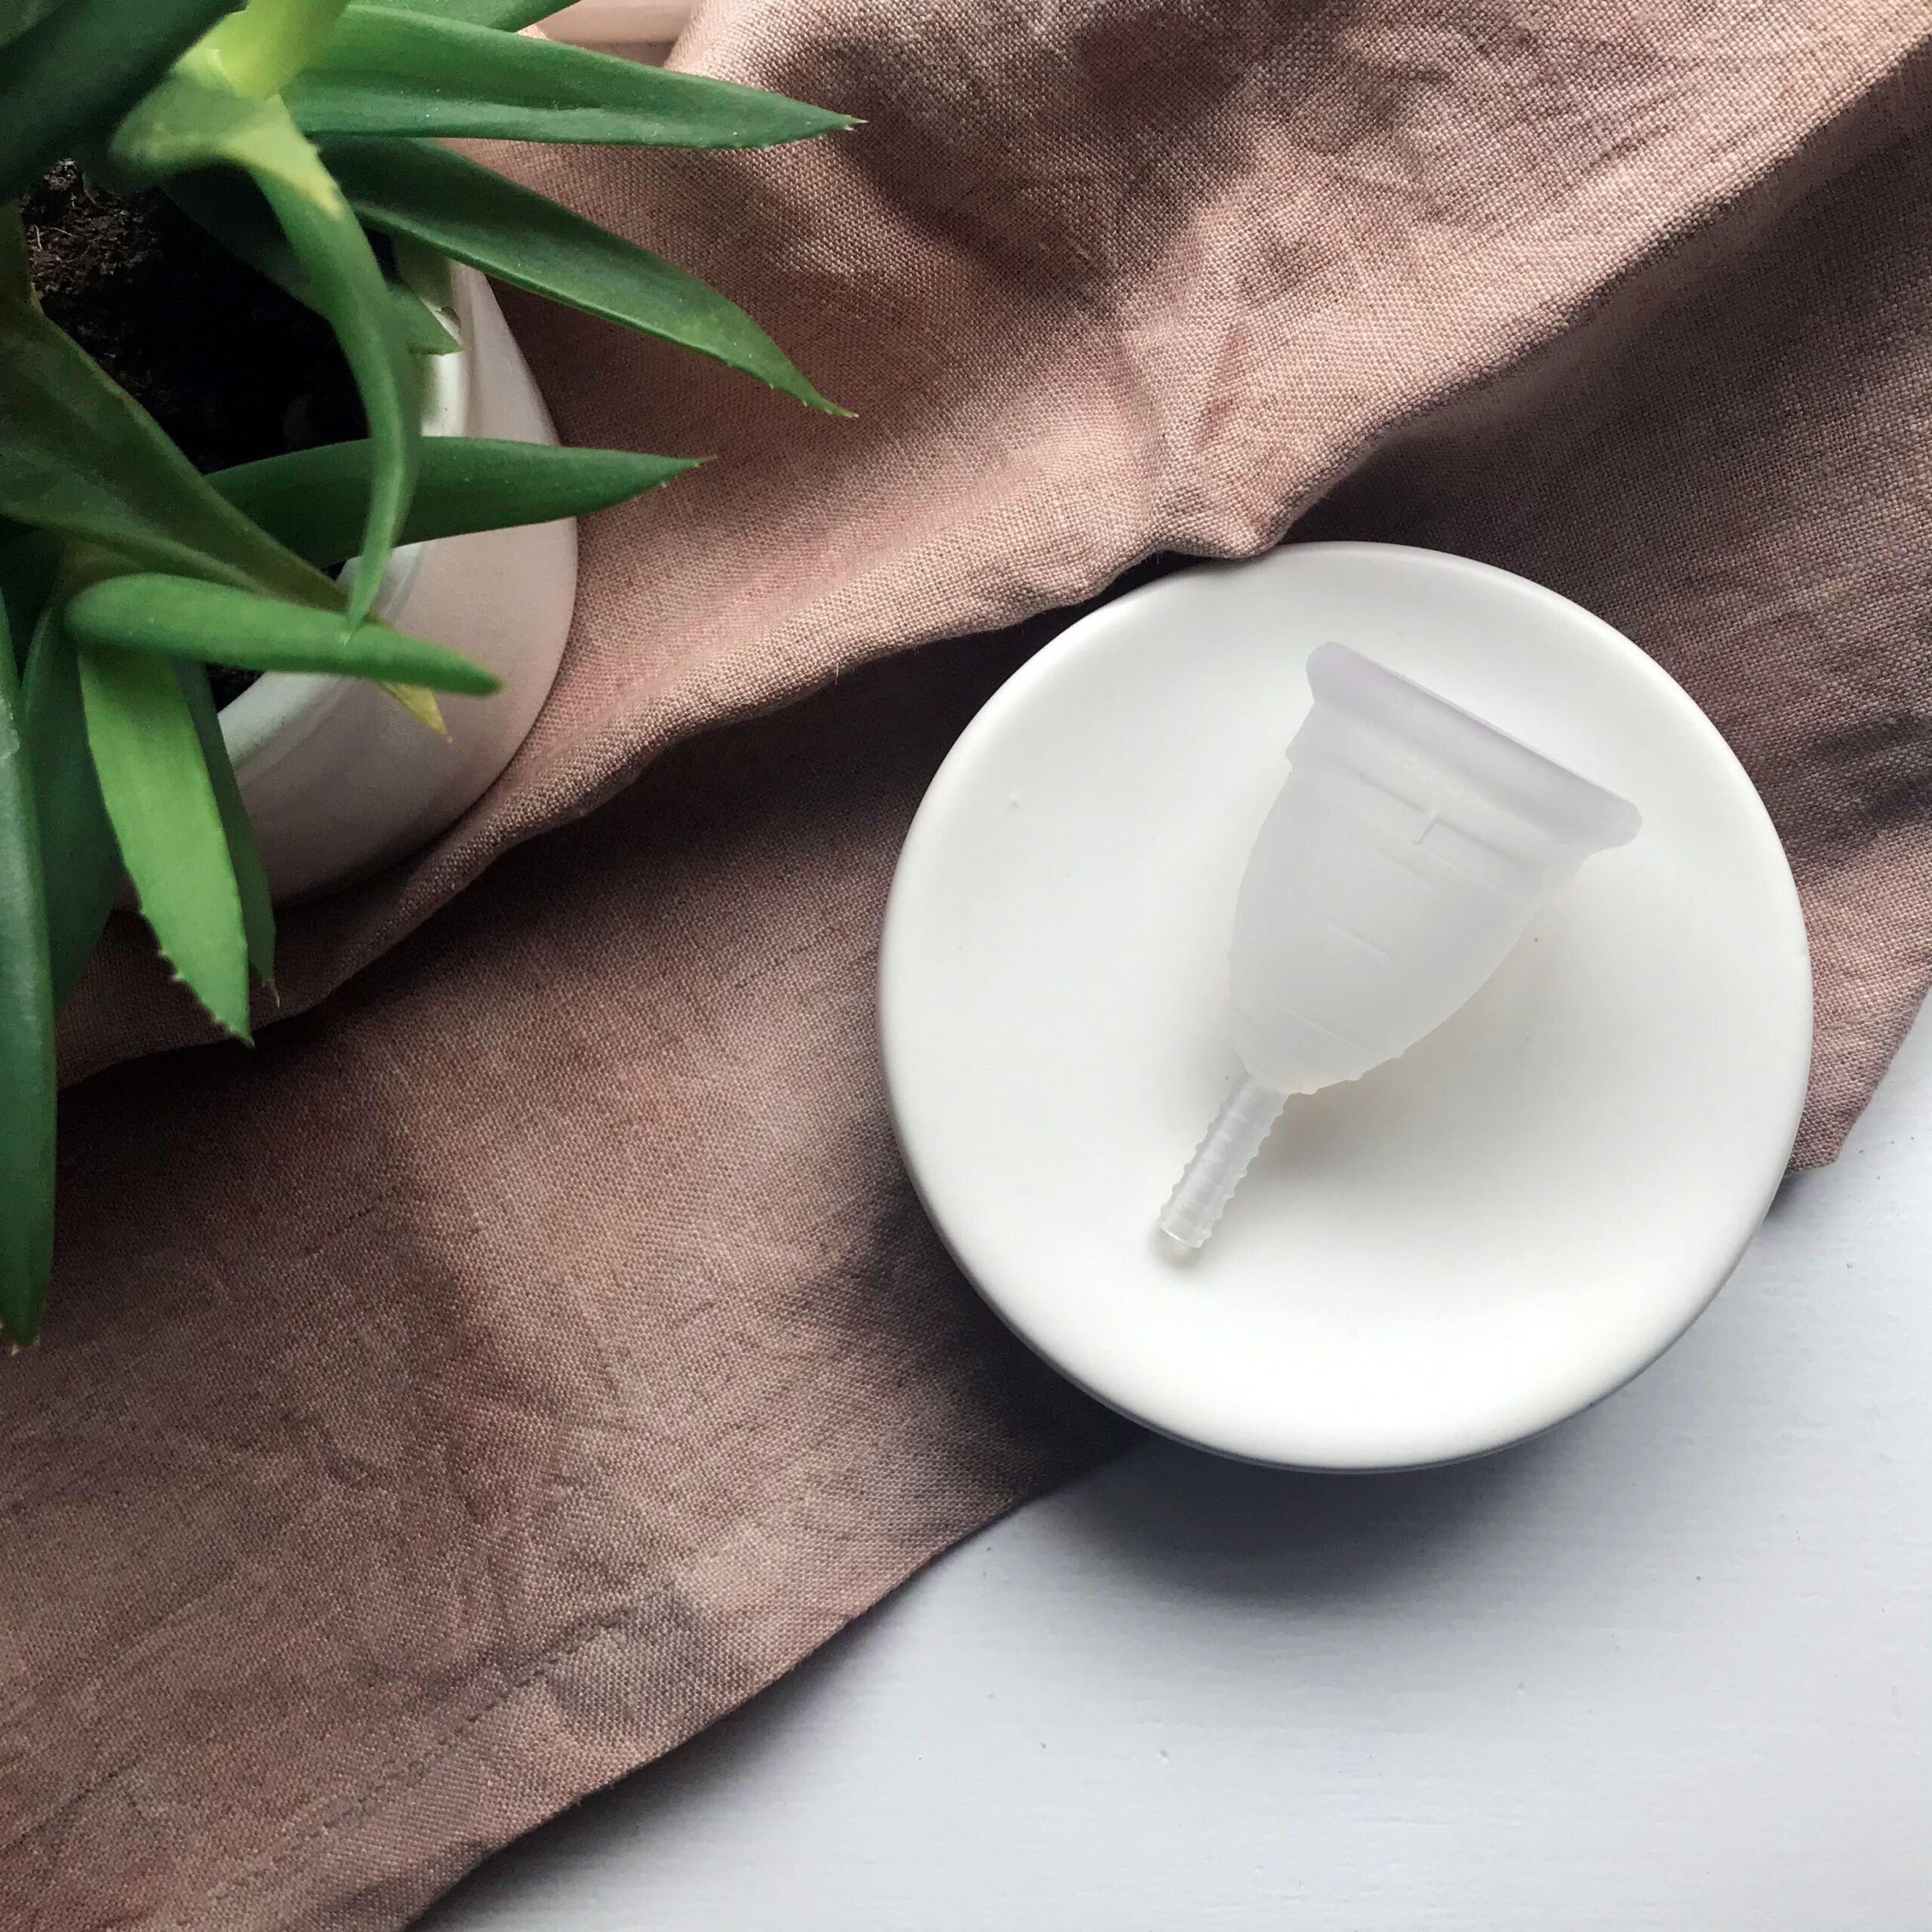 clear menstrual cup on a white dish next to a green plant